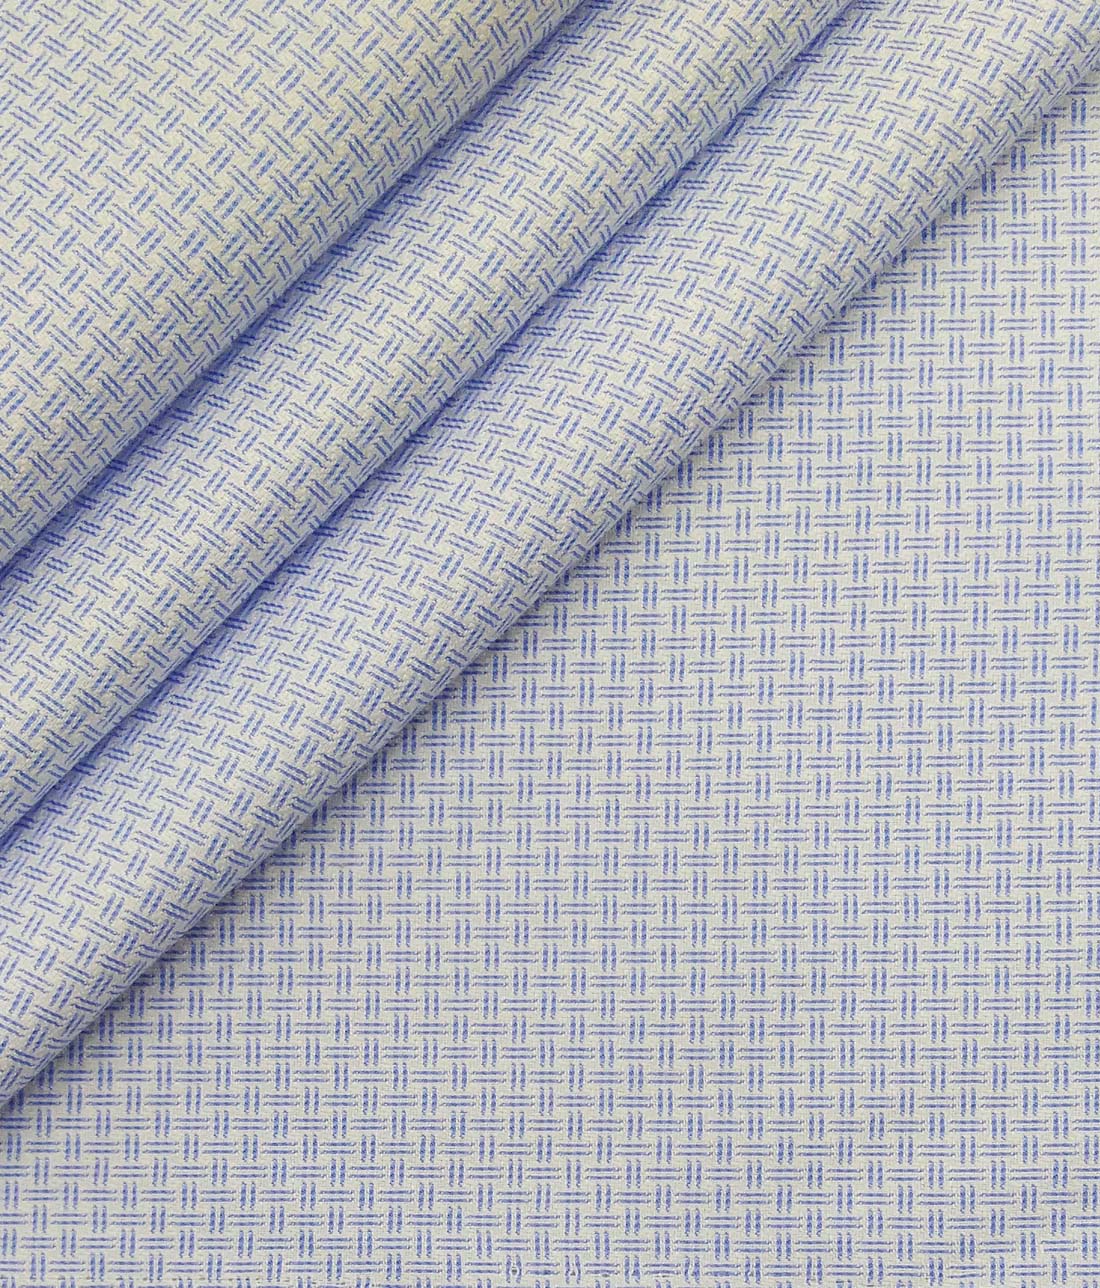 Combo of Raymond Royal Blue Checks Trouser Fabric With Exquisite White Cotton Blend Shirt Fabric (Unstitched)